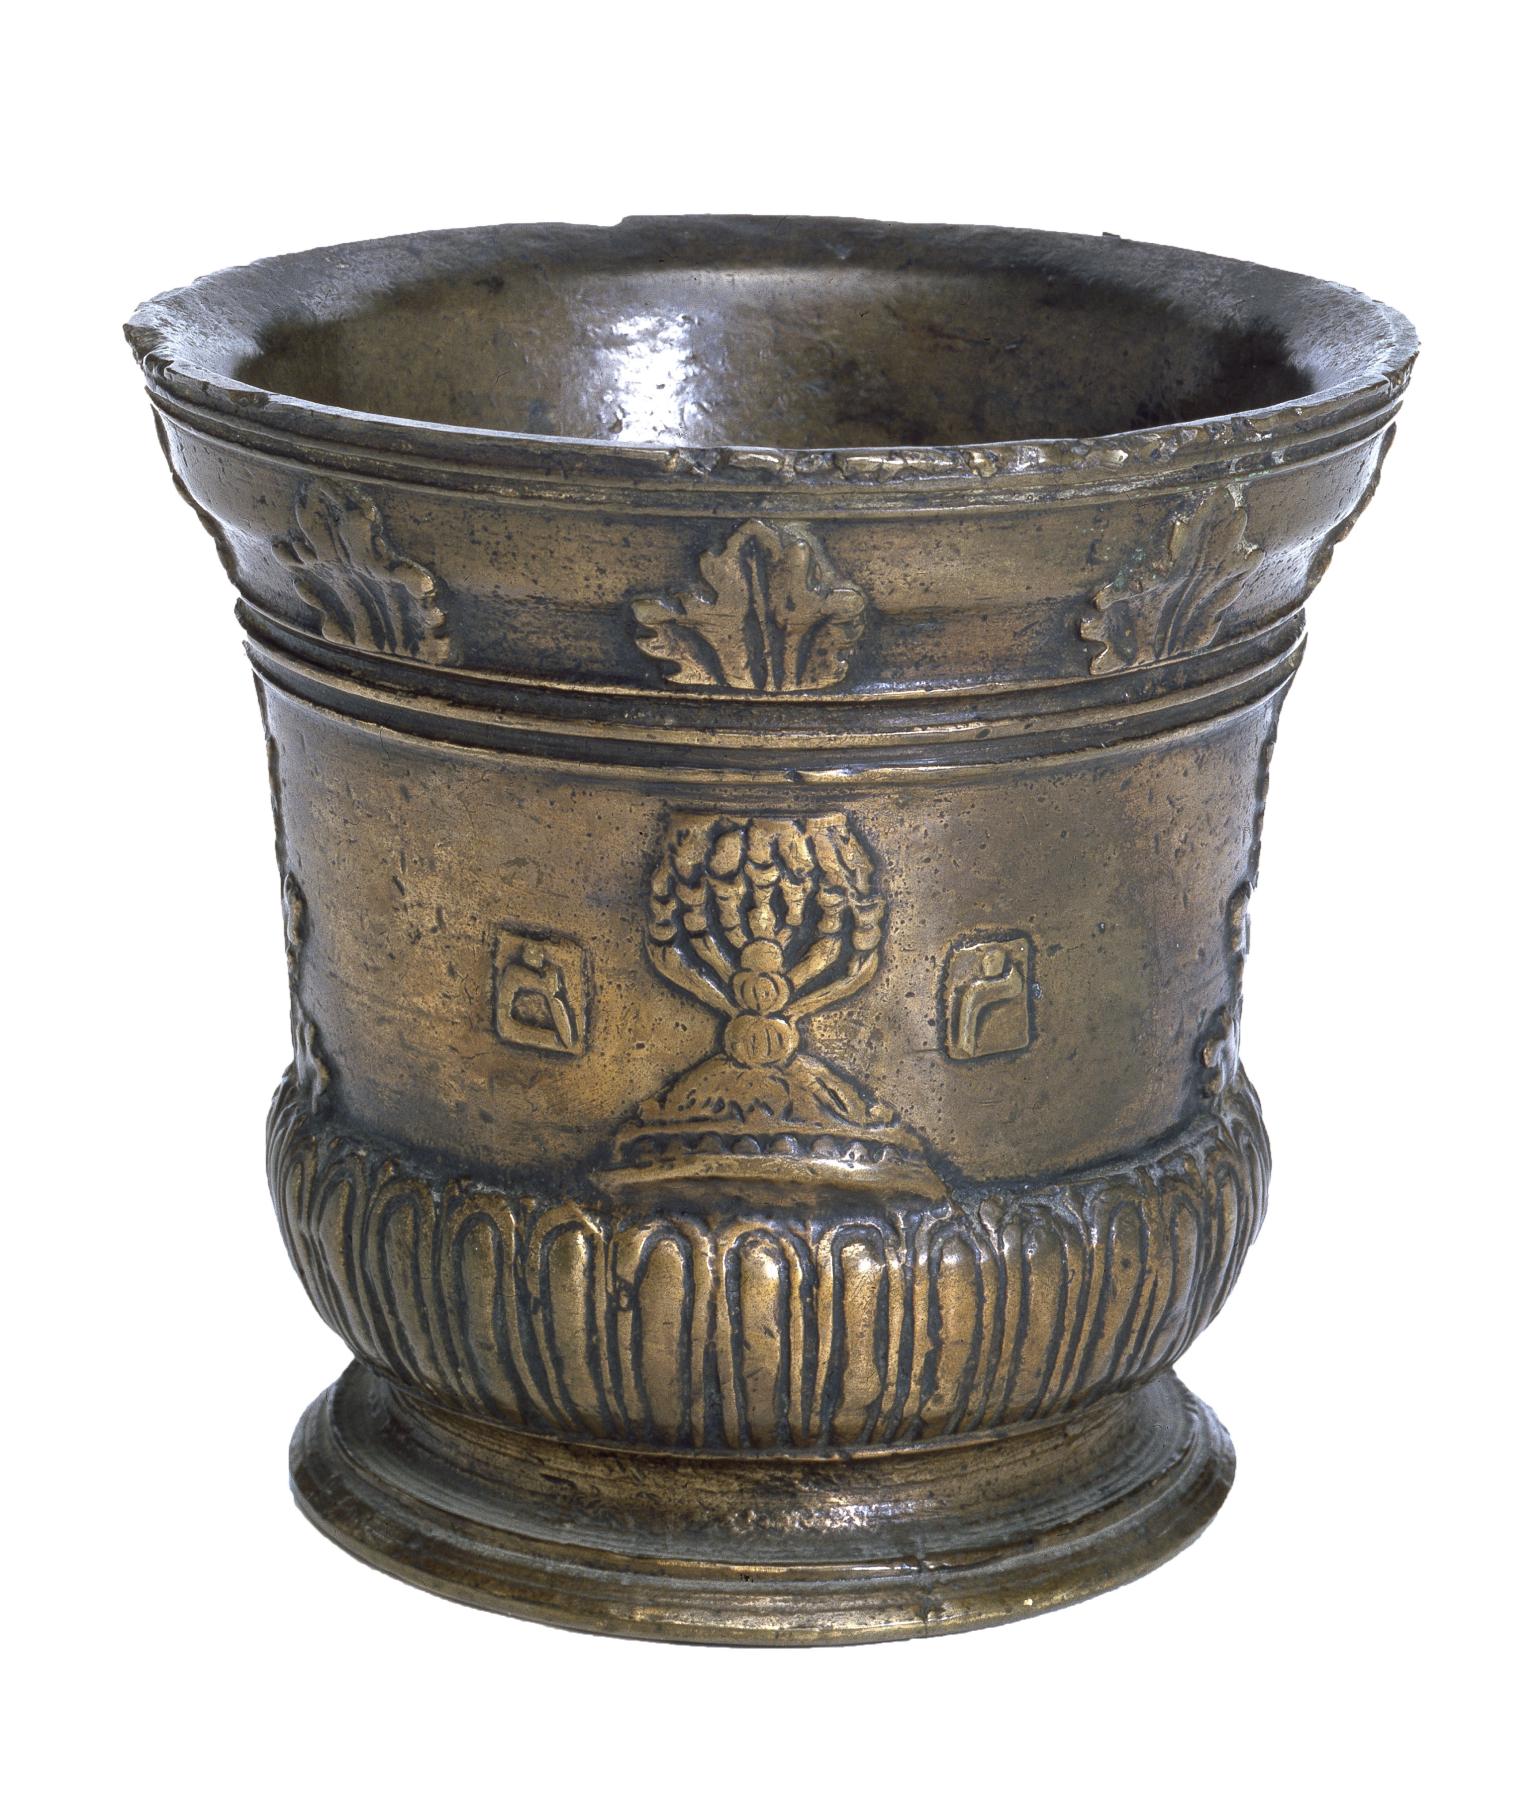 Bronze mortar decorated with a seven-branched candelabrum, flanked with the Hebrew letters mem and resh.